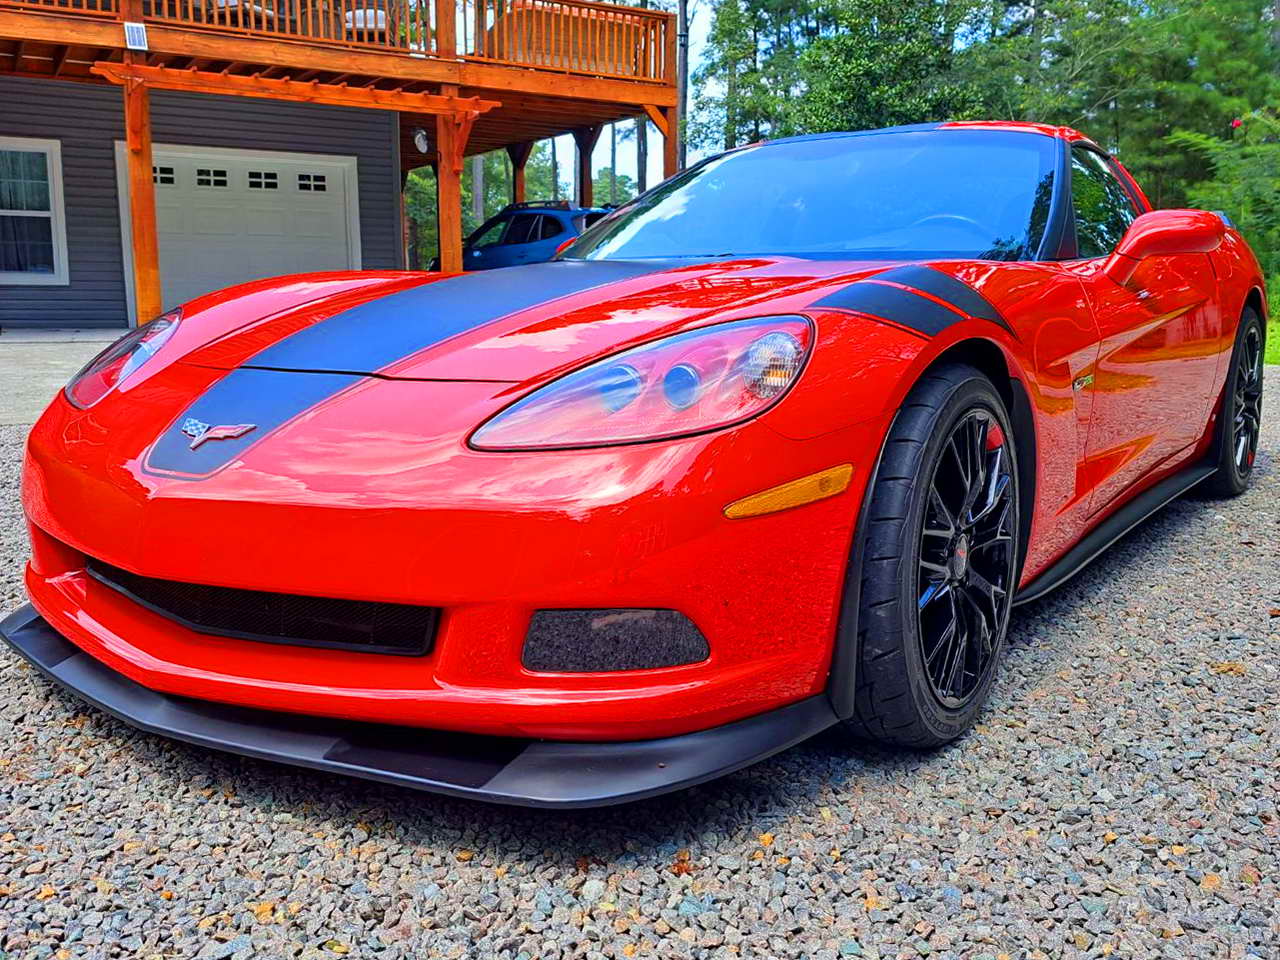 2009 Corvette Coupe Victory Red